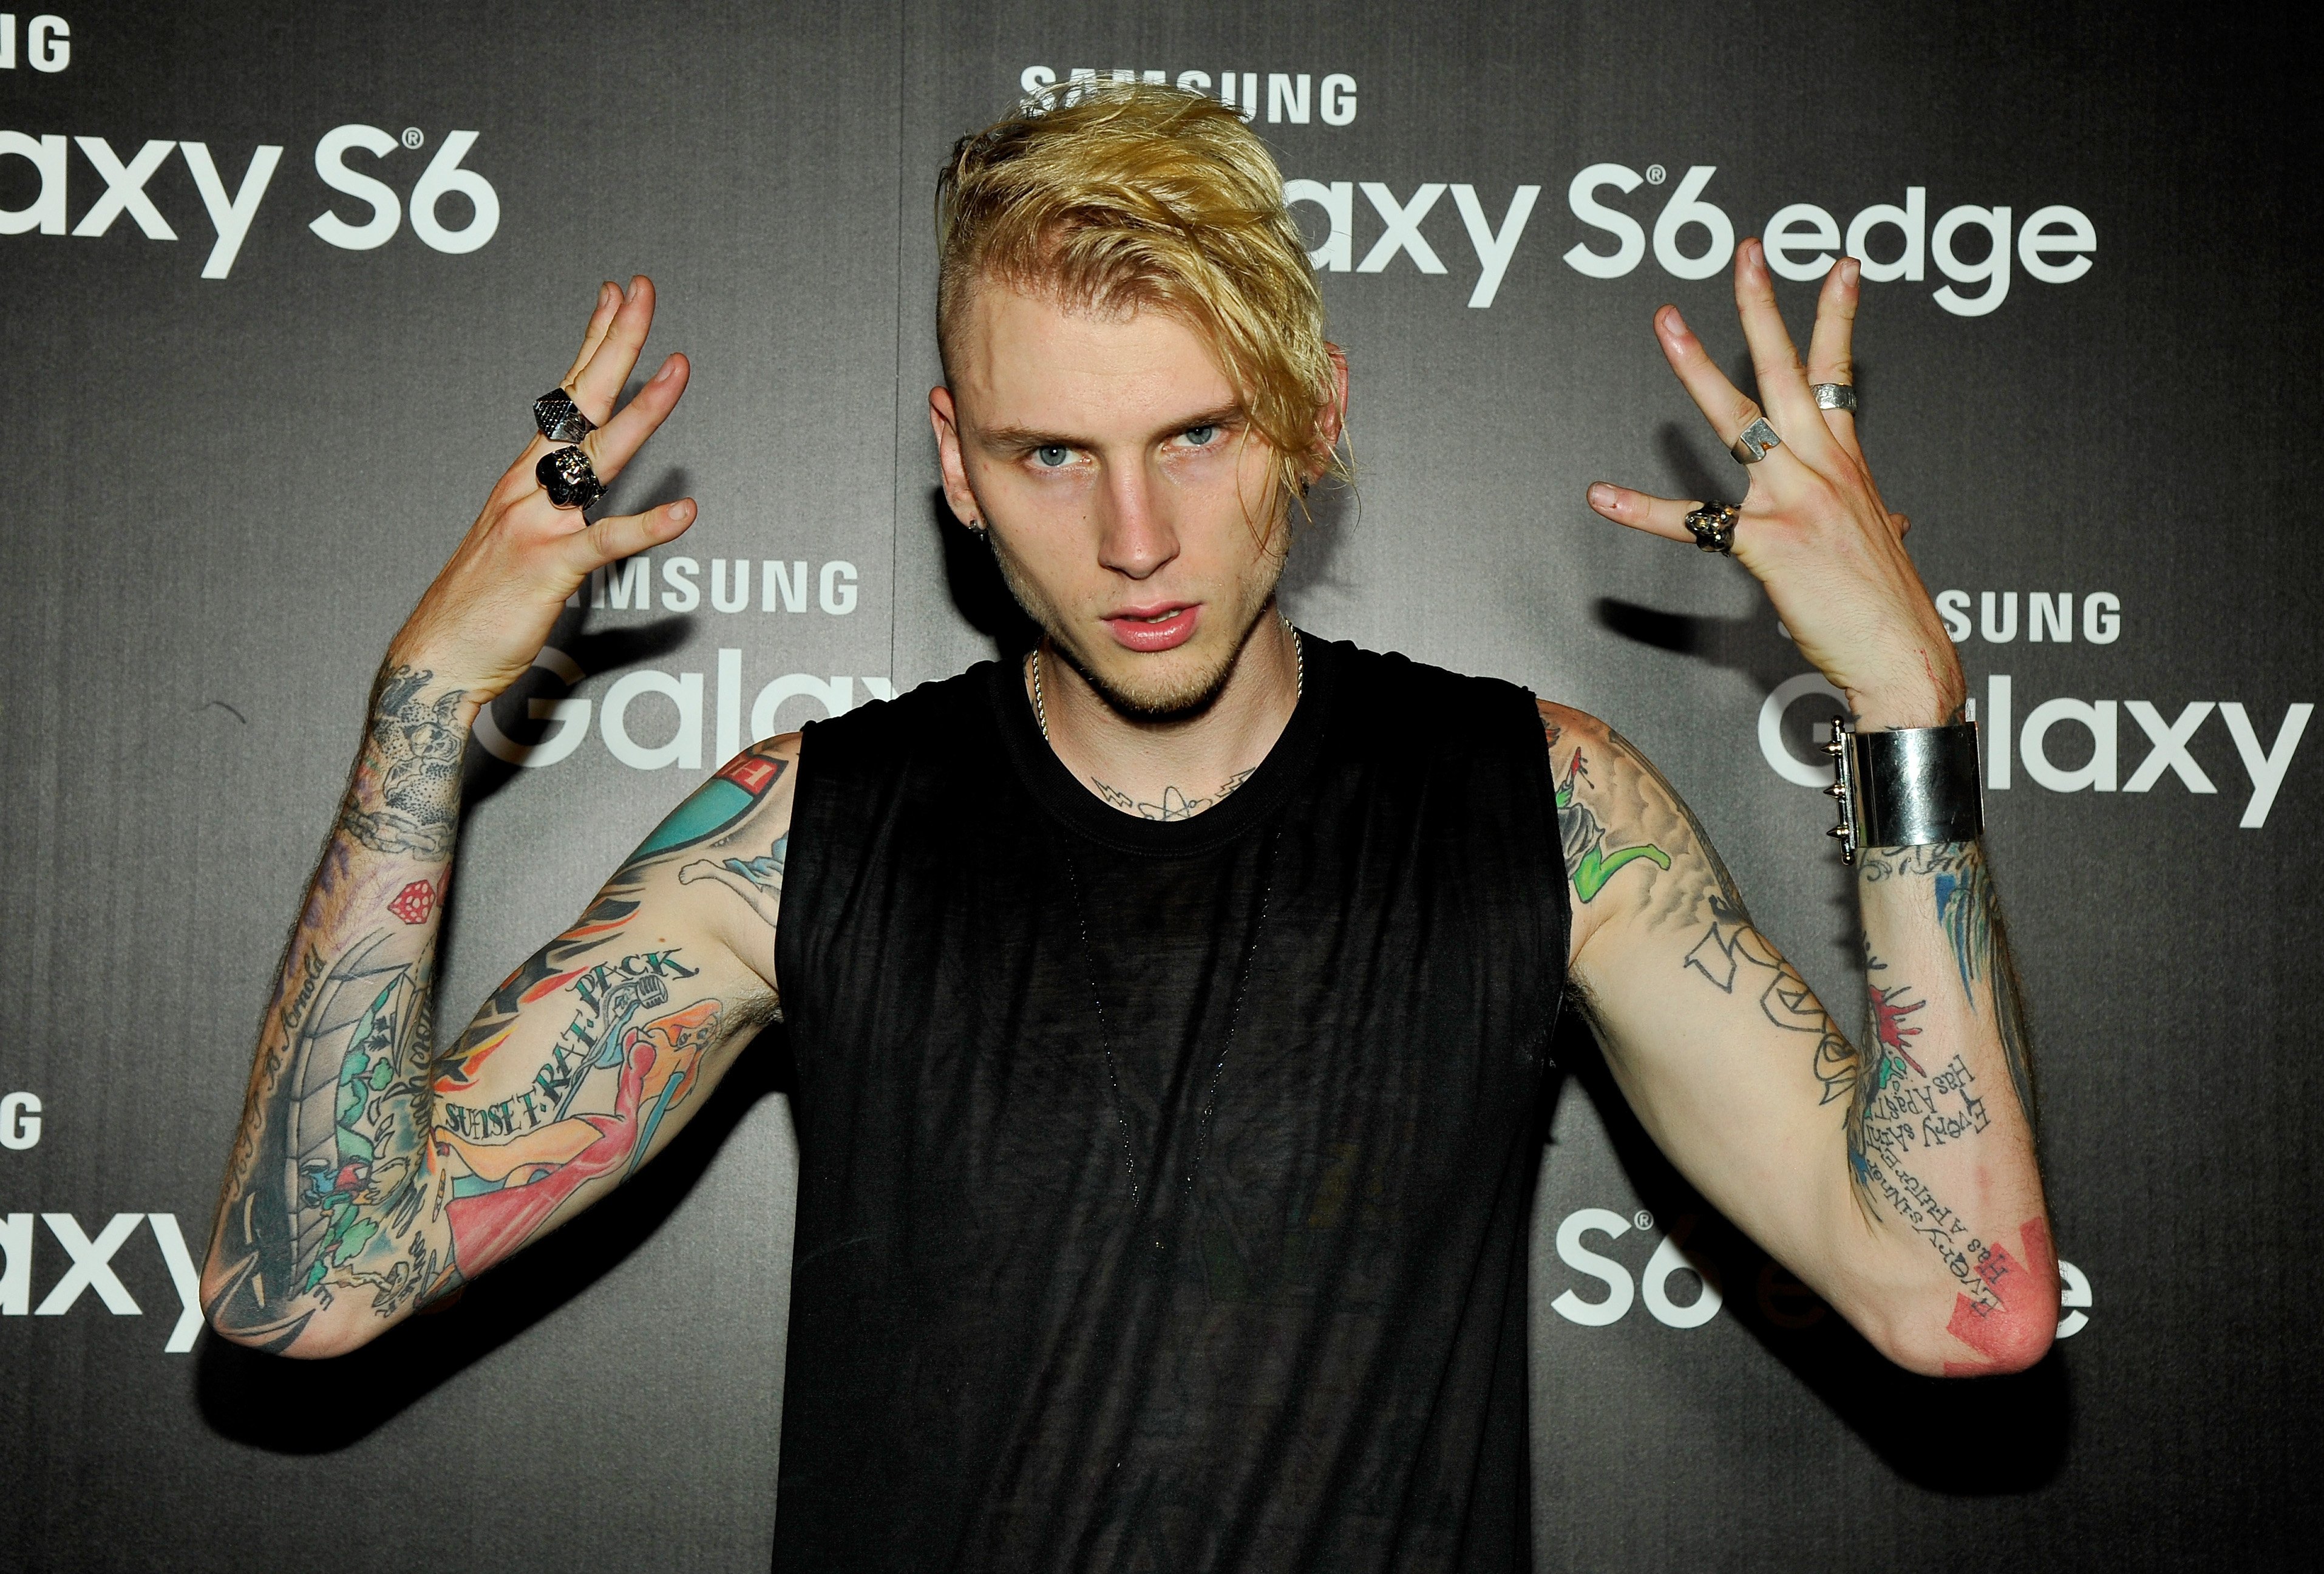 Machine Gun Kelly's Jessica Rabbit tattoo on his right bicep. | Source: Getty Images